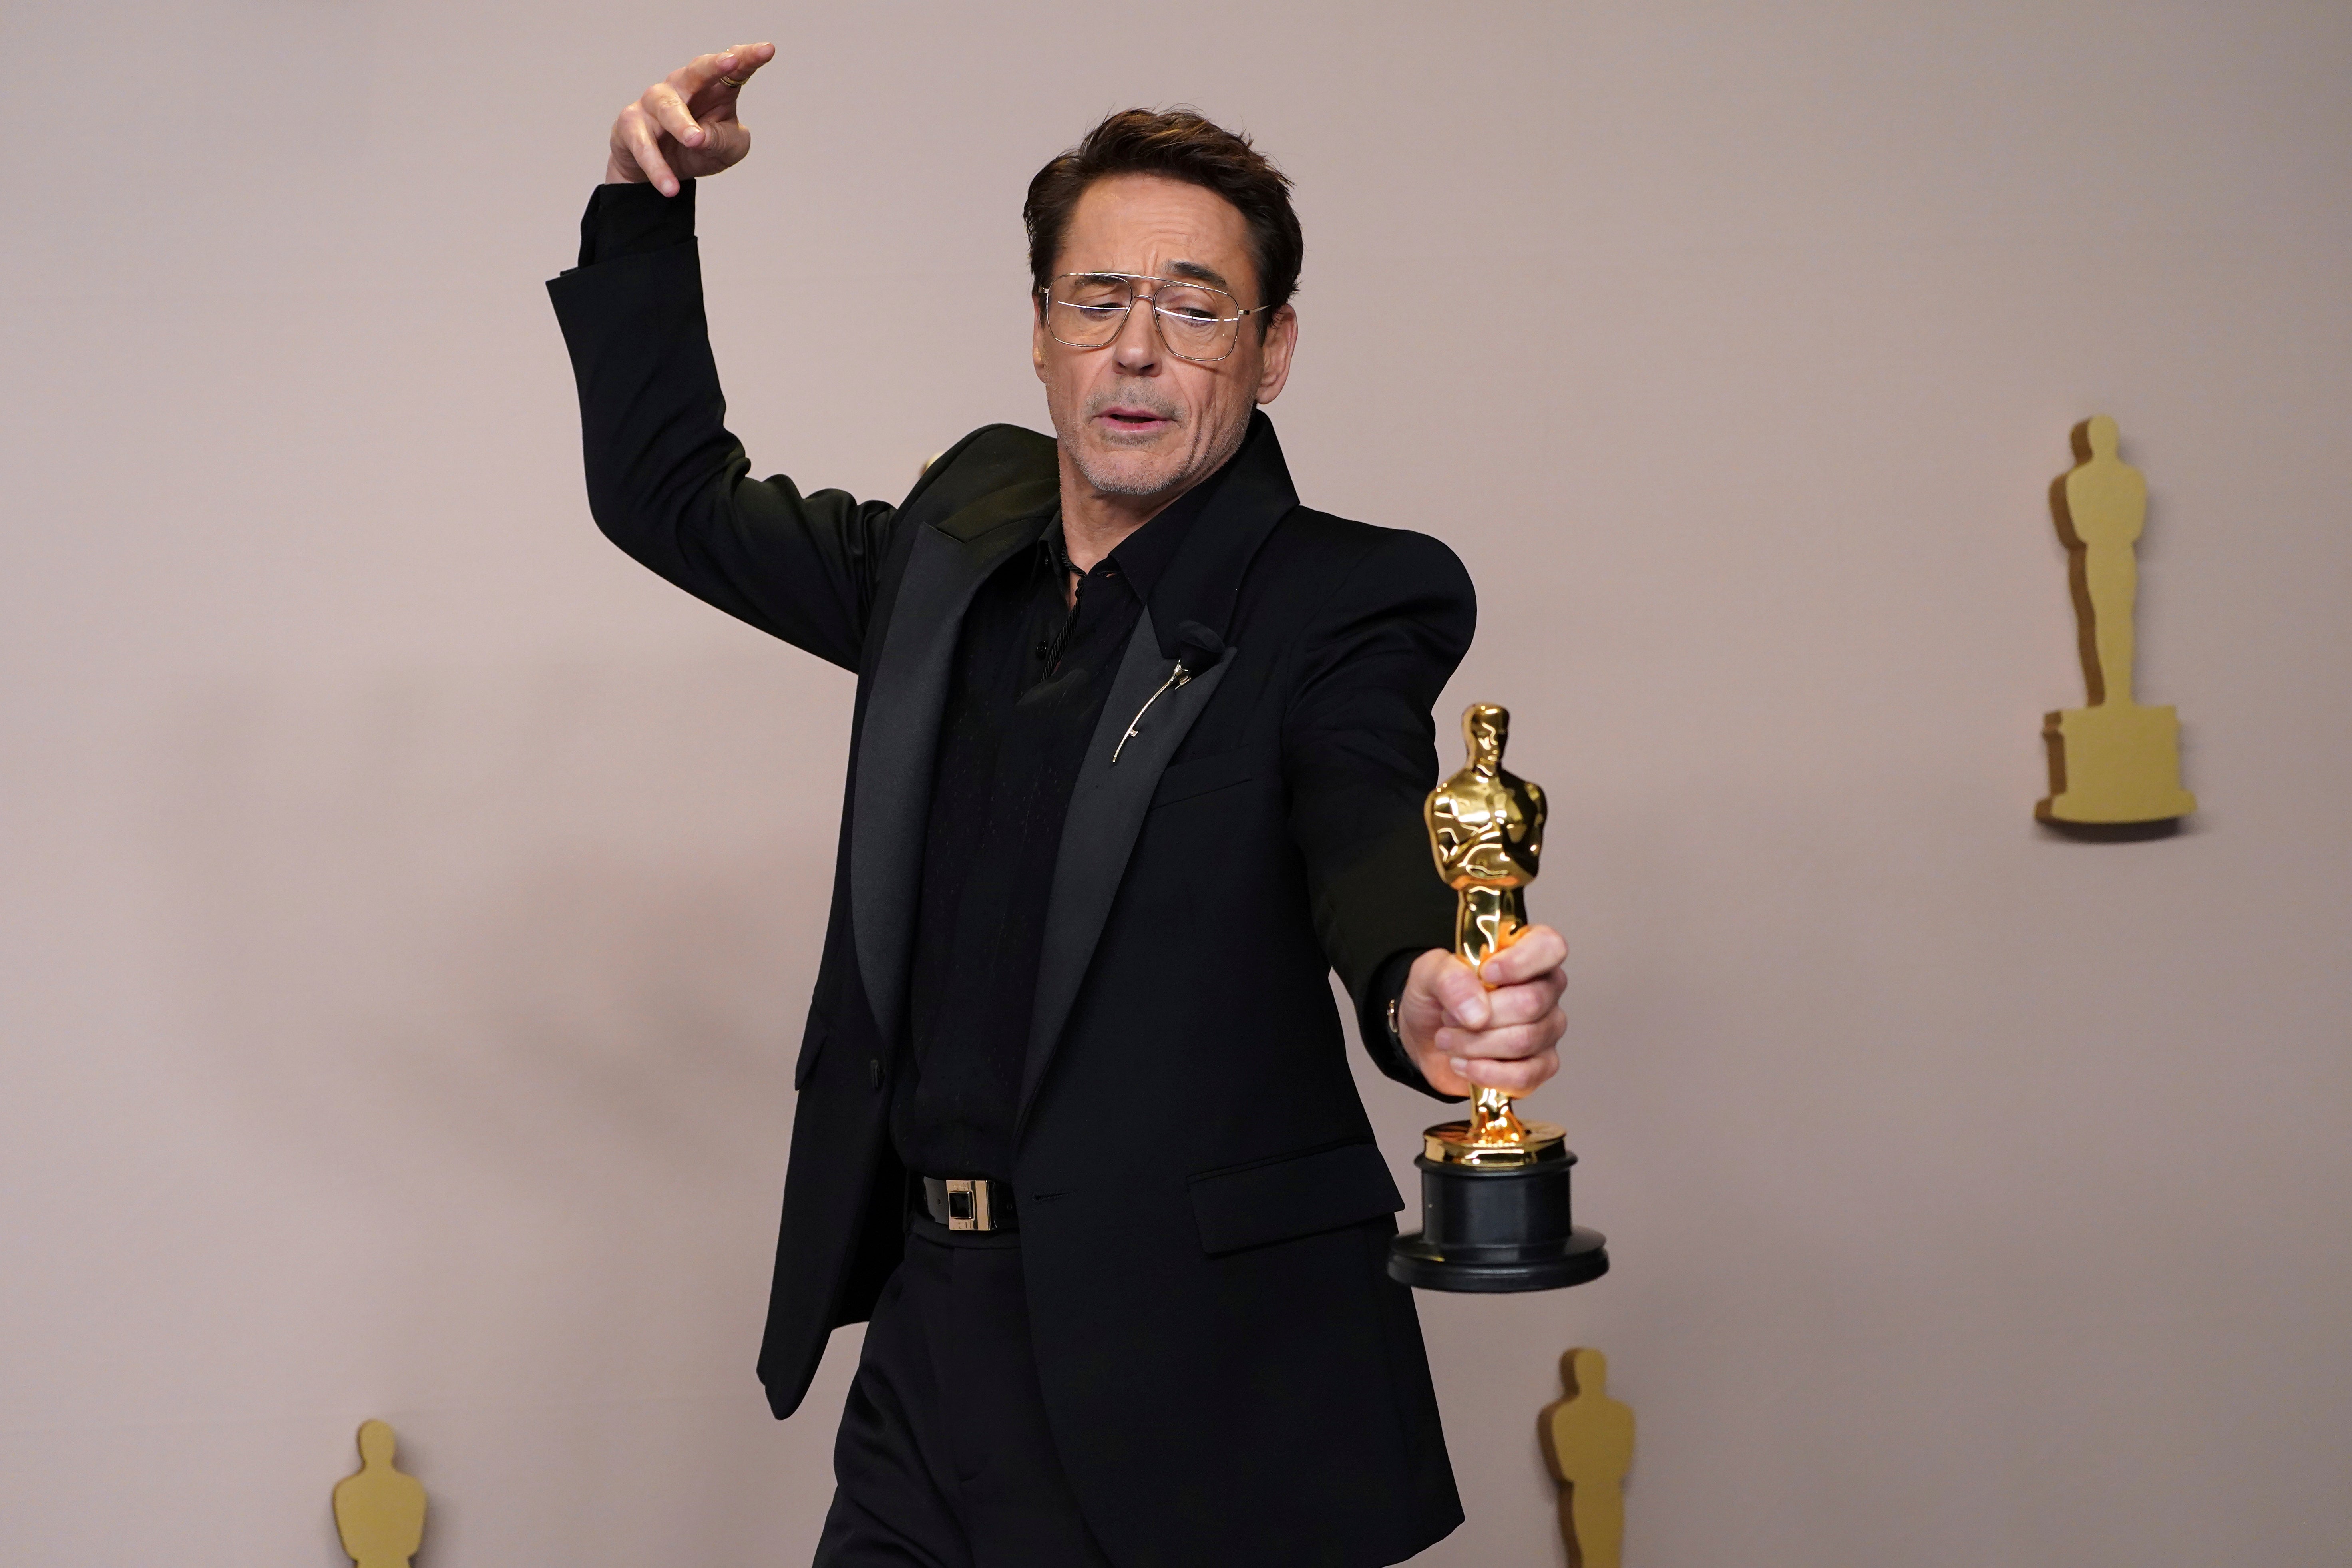 Downey Jr poses with his Oscar